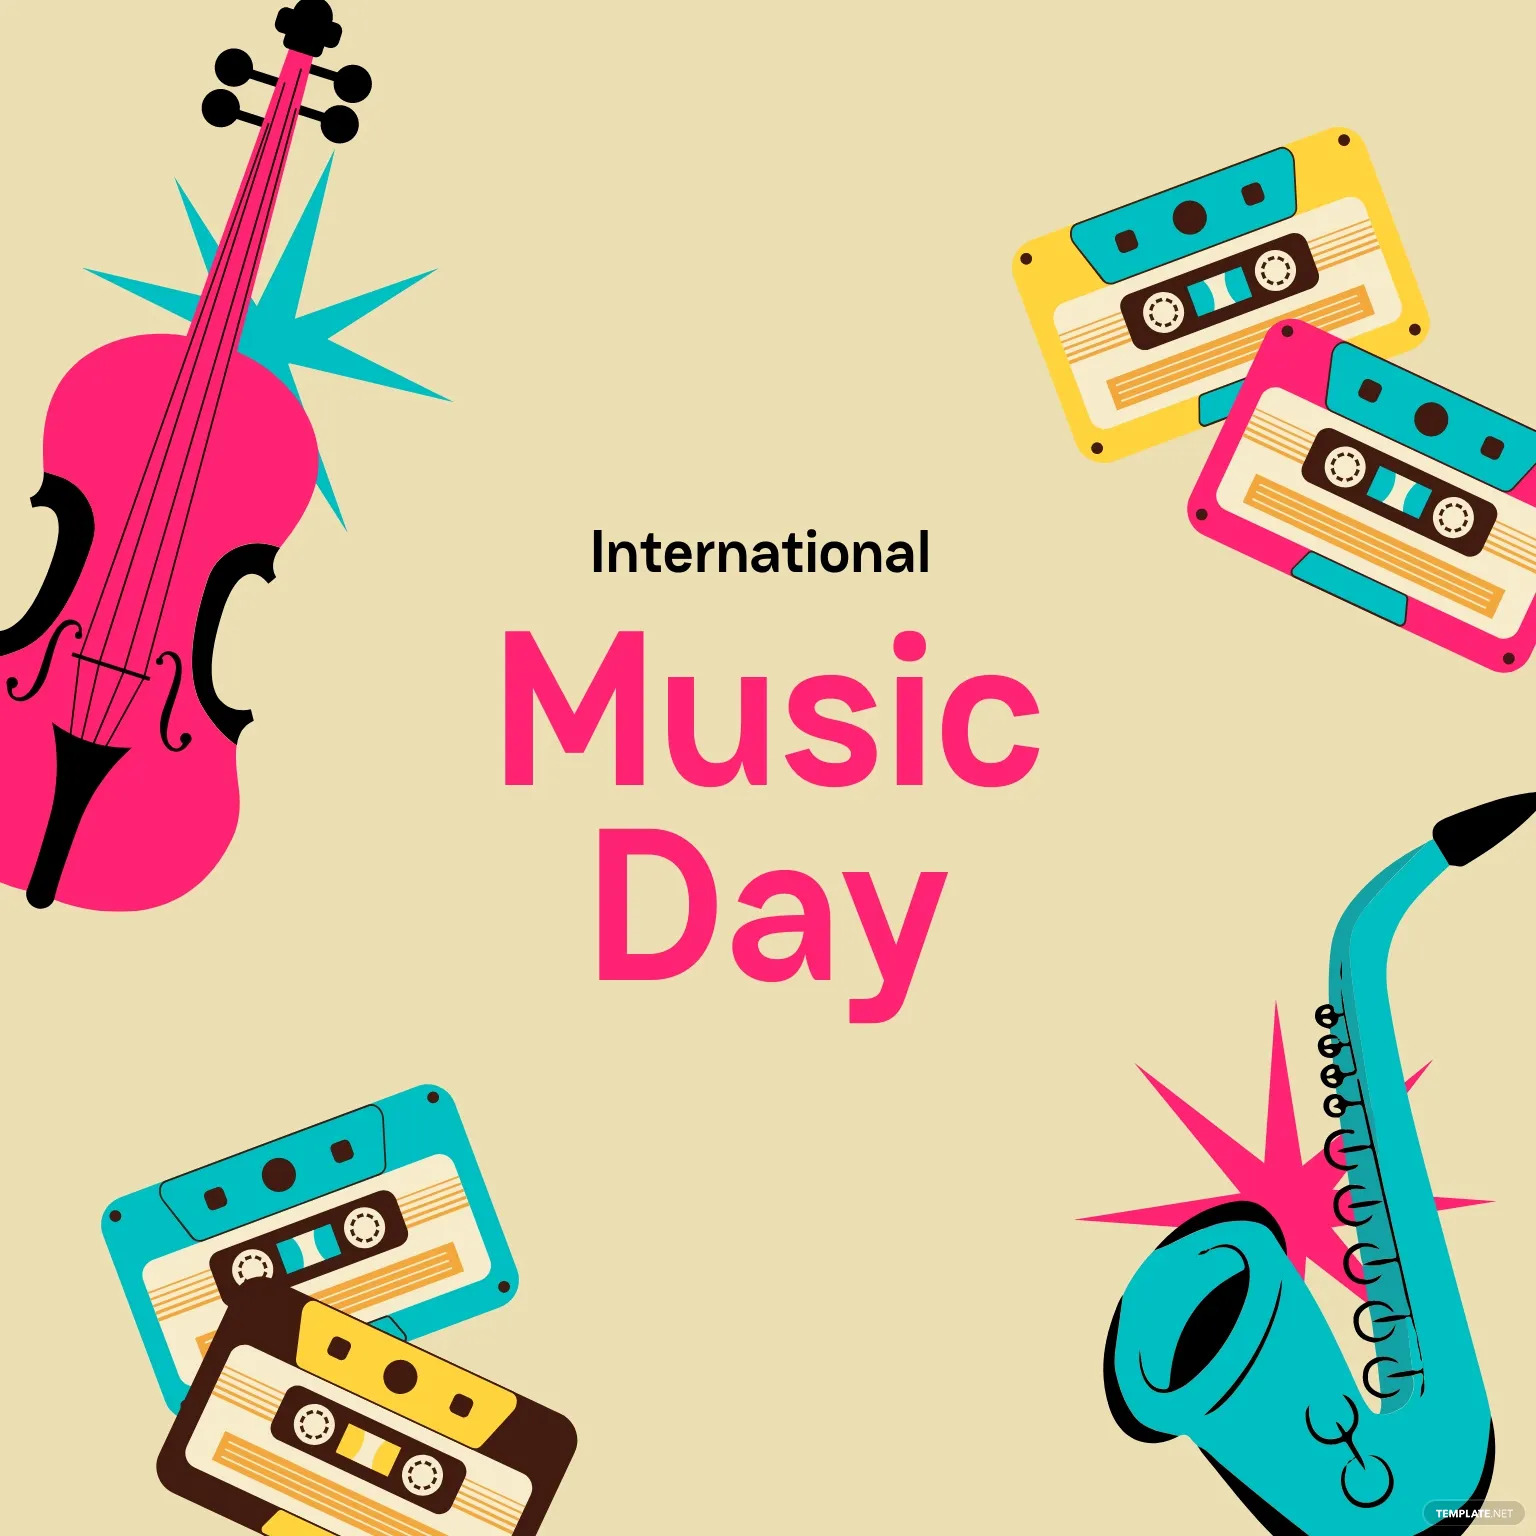 international music day greeting card ideas and examples